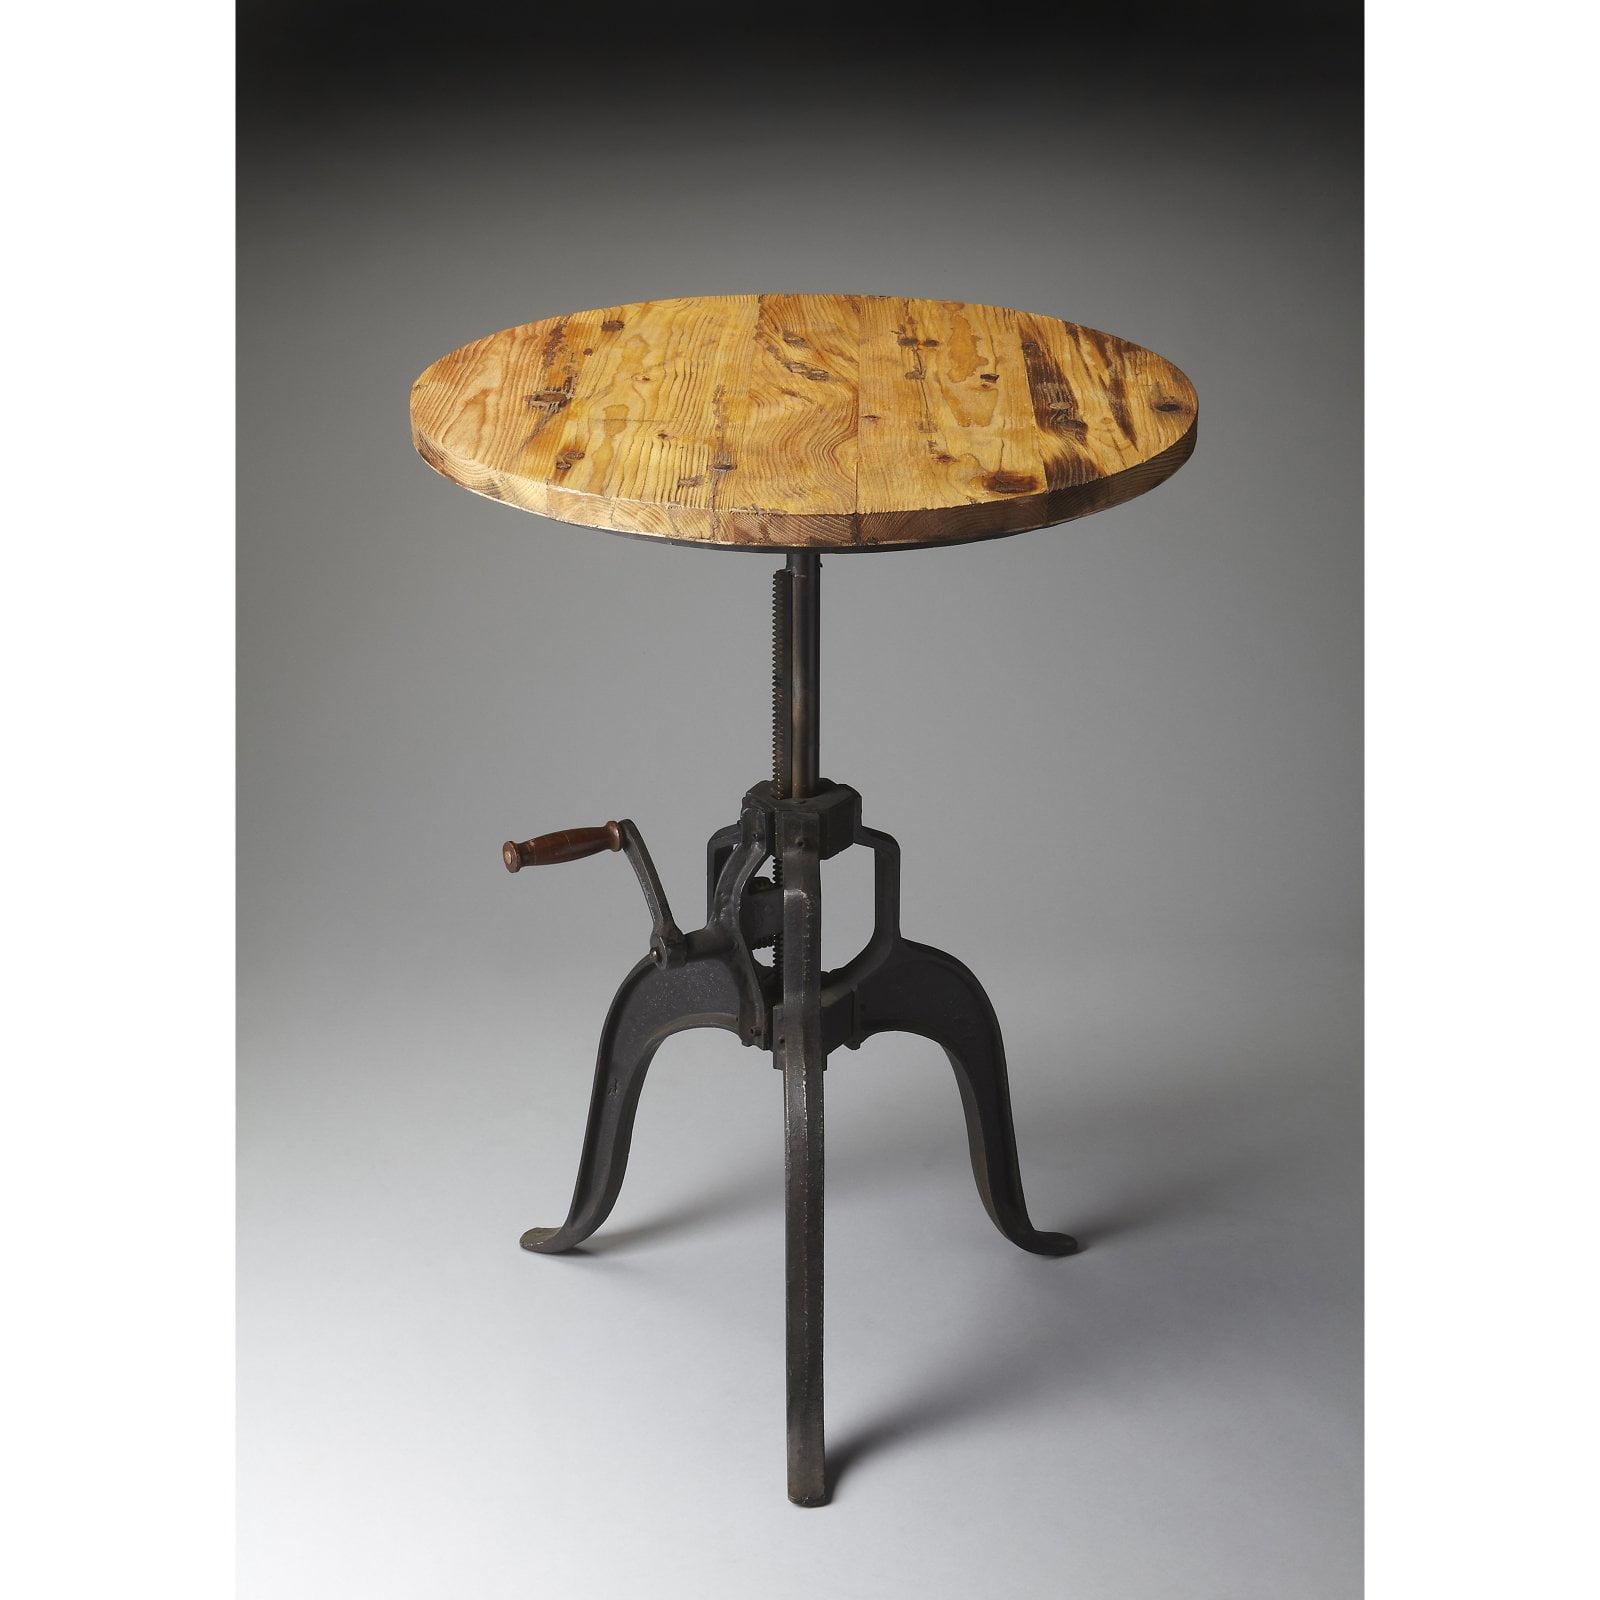 Industrial Crank-Adjustable Round Dining Table with Recycled Wood Top